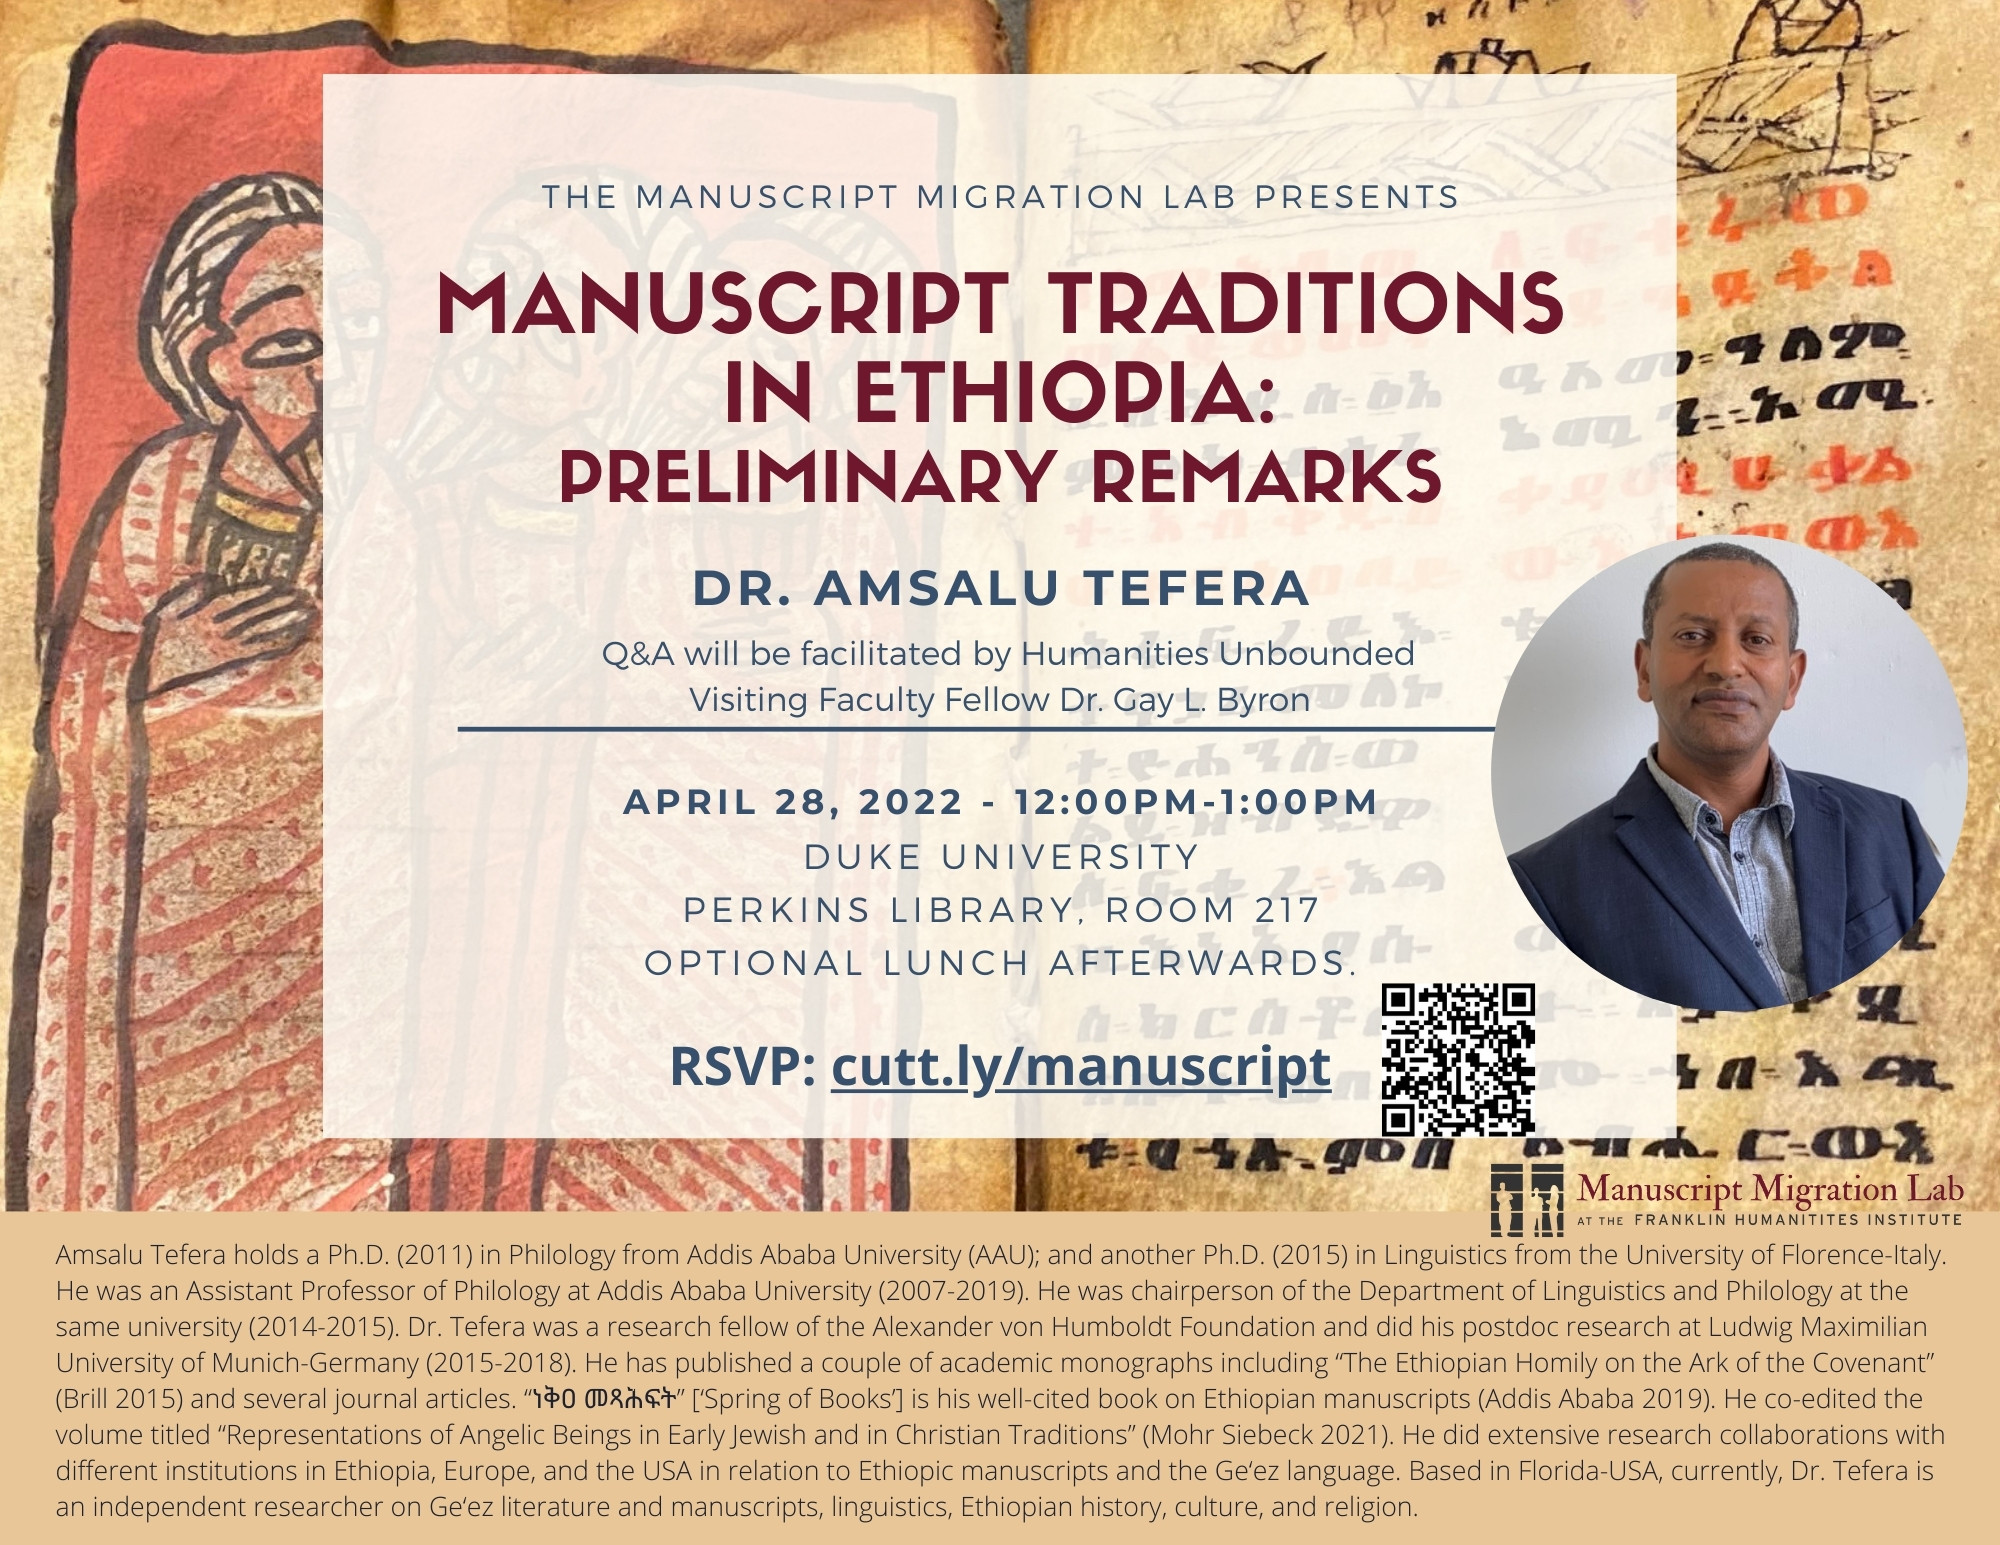 Background image of Ethiopic manuscript - foreground image of Dr. Amsalu Tefera (a black man wearing a blue suit) - with text of event description